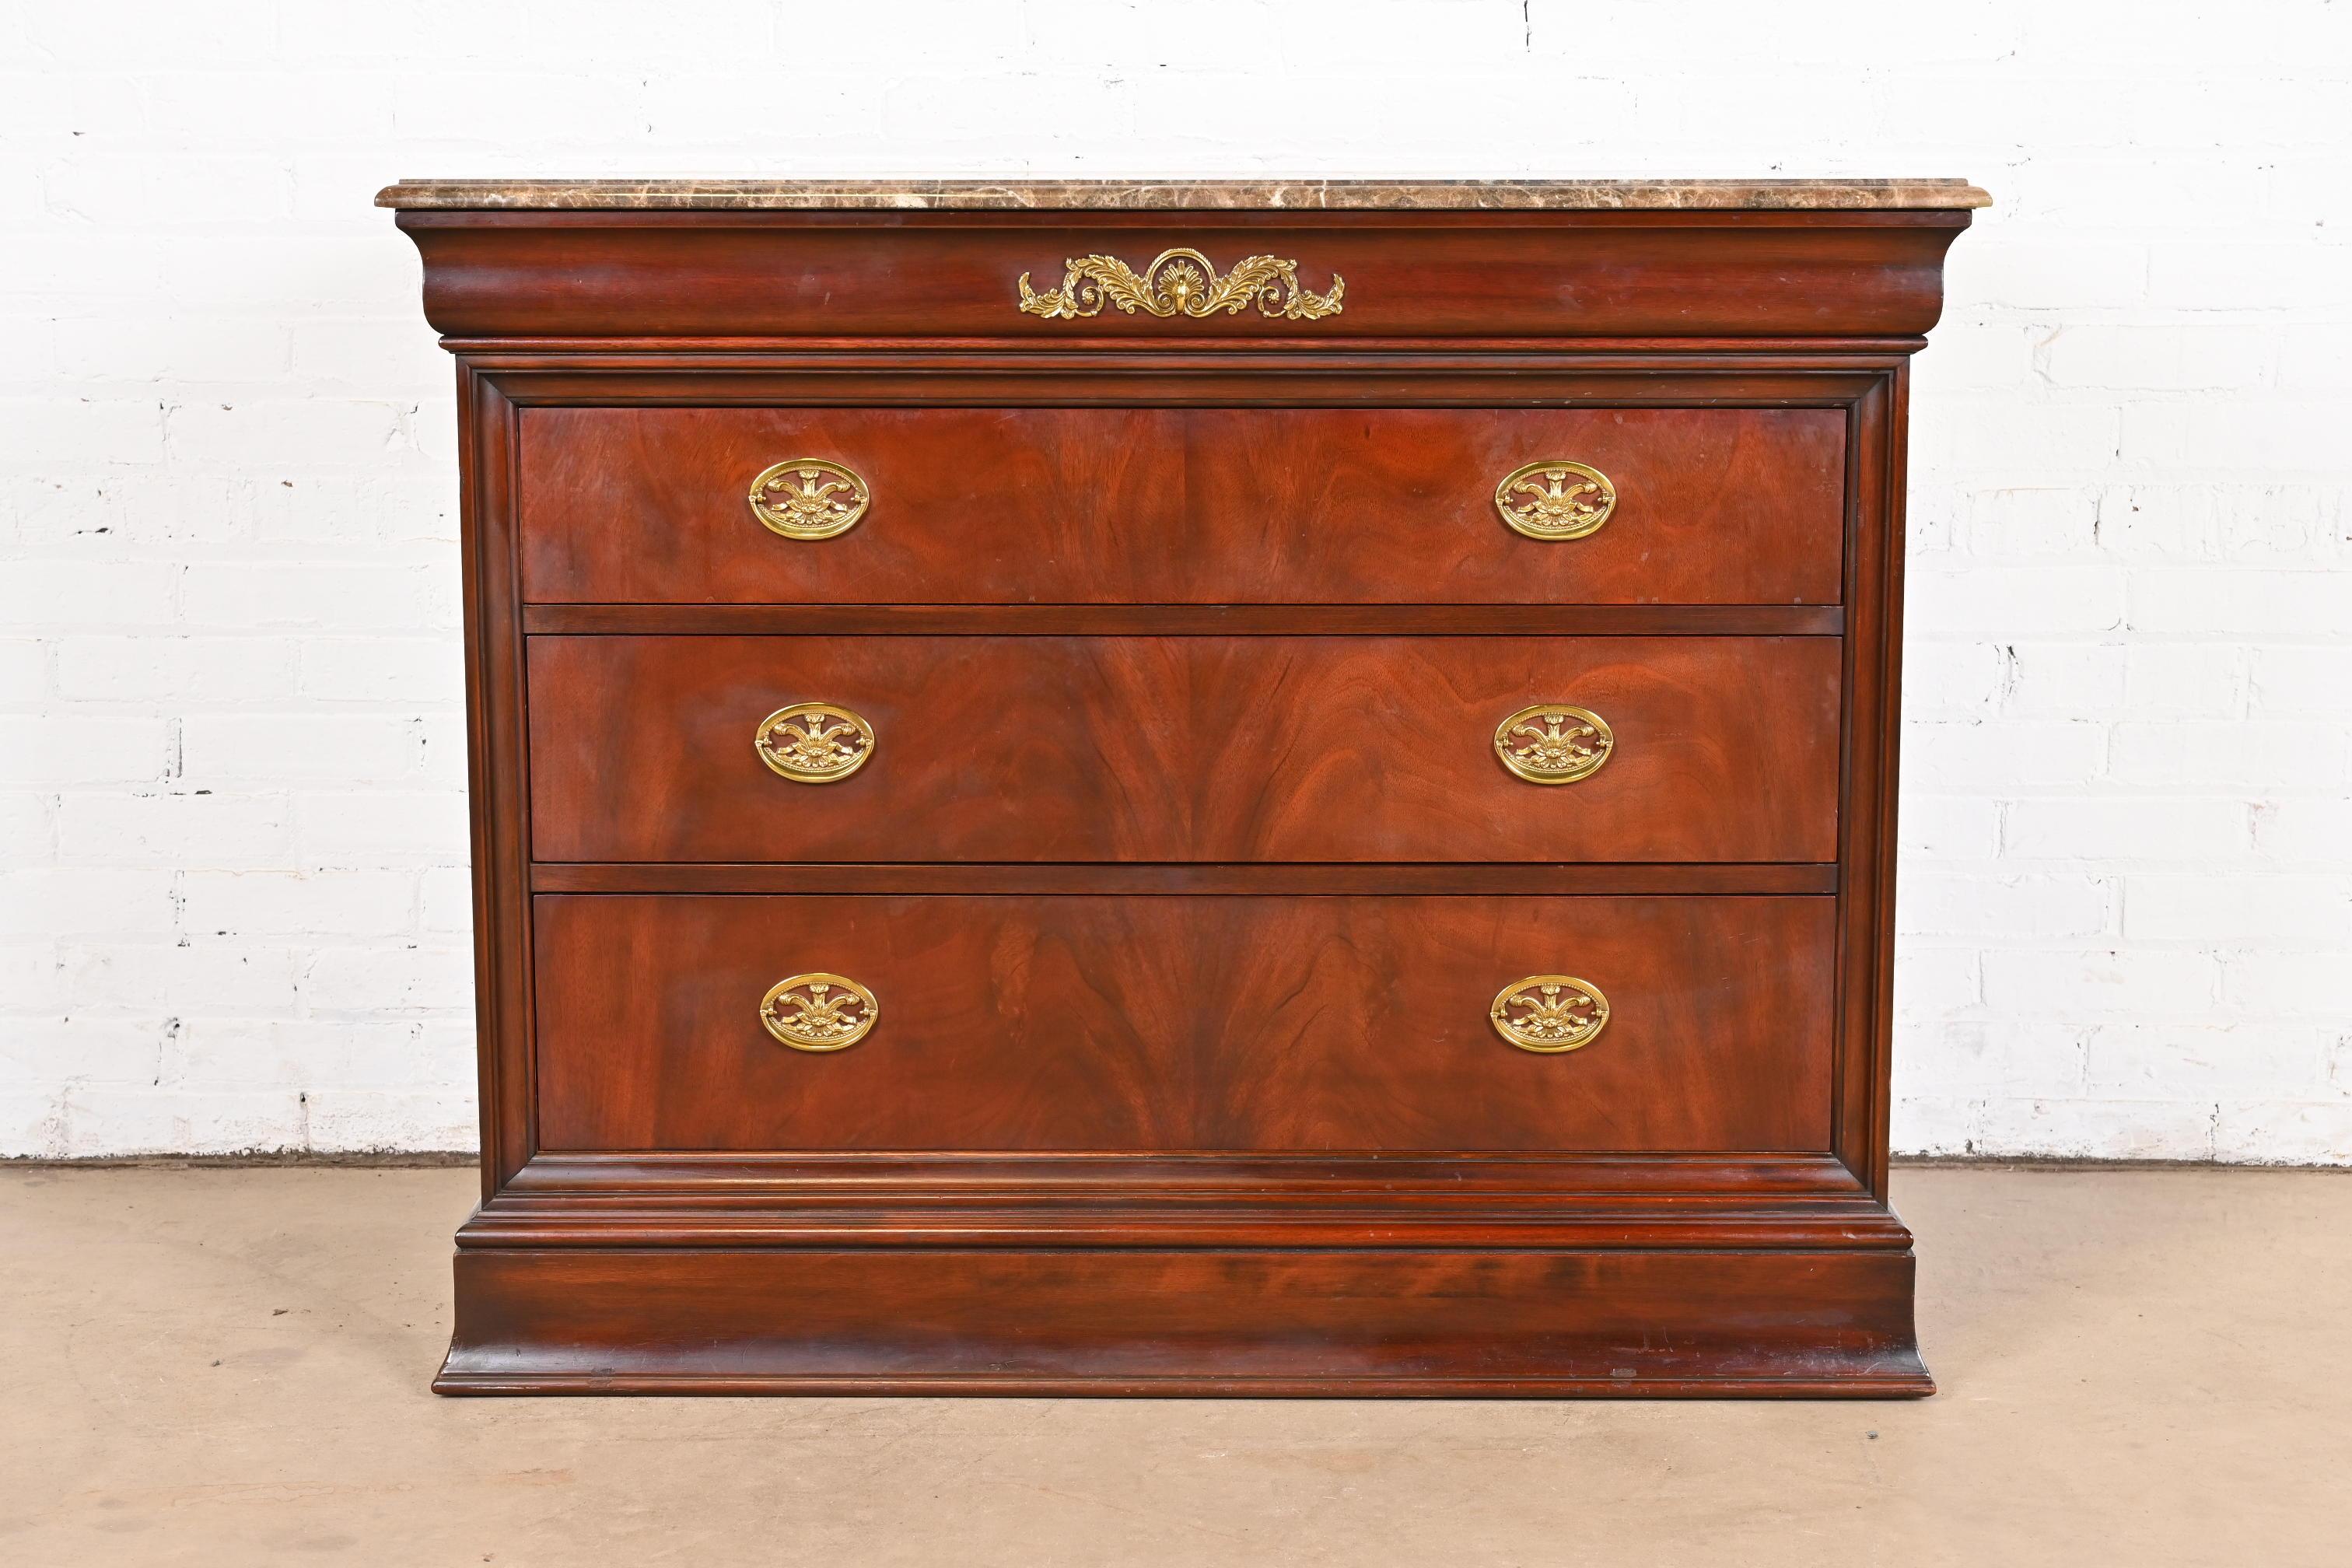 An exceptional French Empire of Louis Philippe style dresser or chest of drawers

By Henkel Harris

USA, 1990s

Stunning book-matched flame mahogany, with beveled marble top, and original brass hardware. Top drawer with felt inserts for